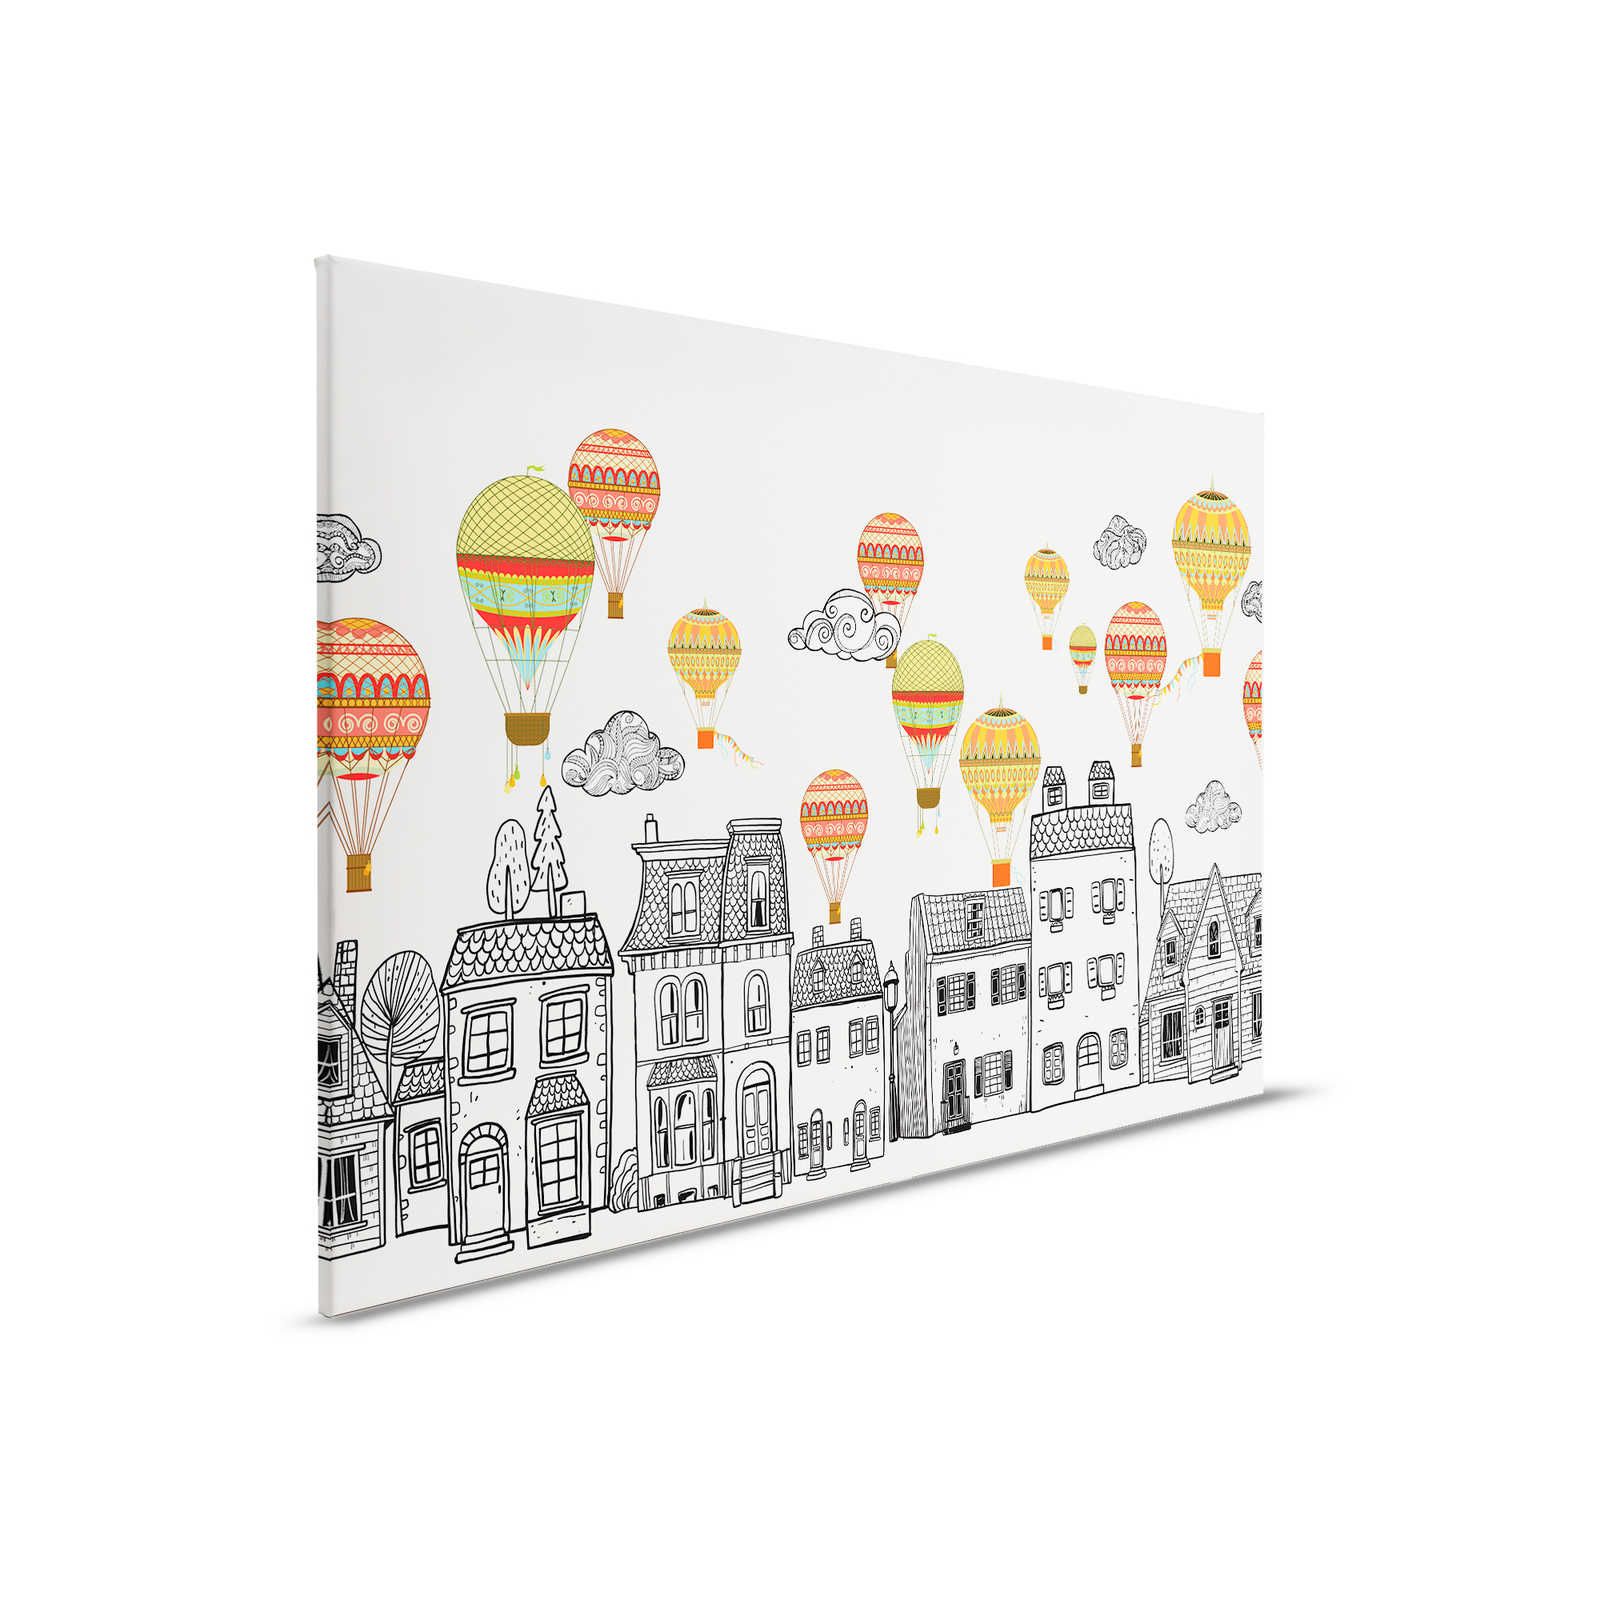         Canvas Small Town with Hot Air Balloons - 90 cm x 60 cm
    